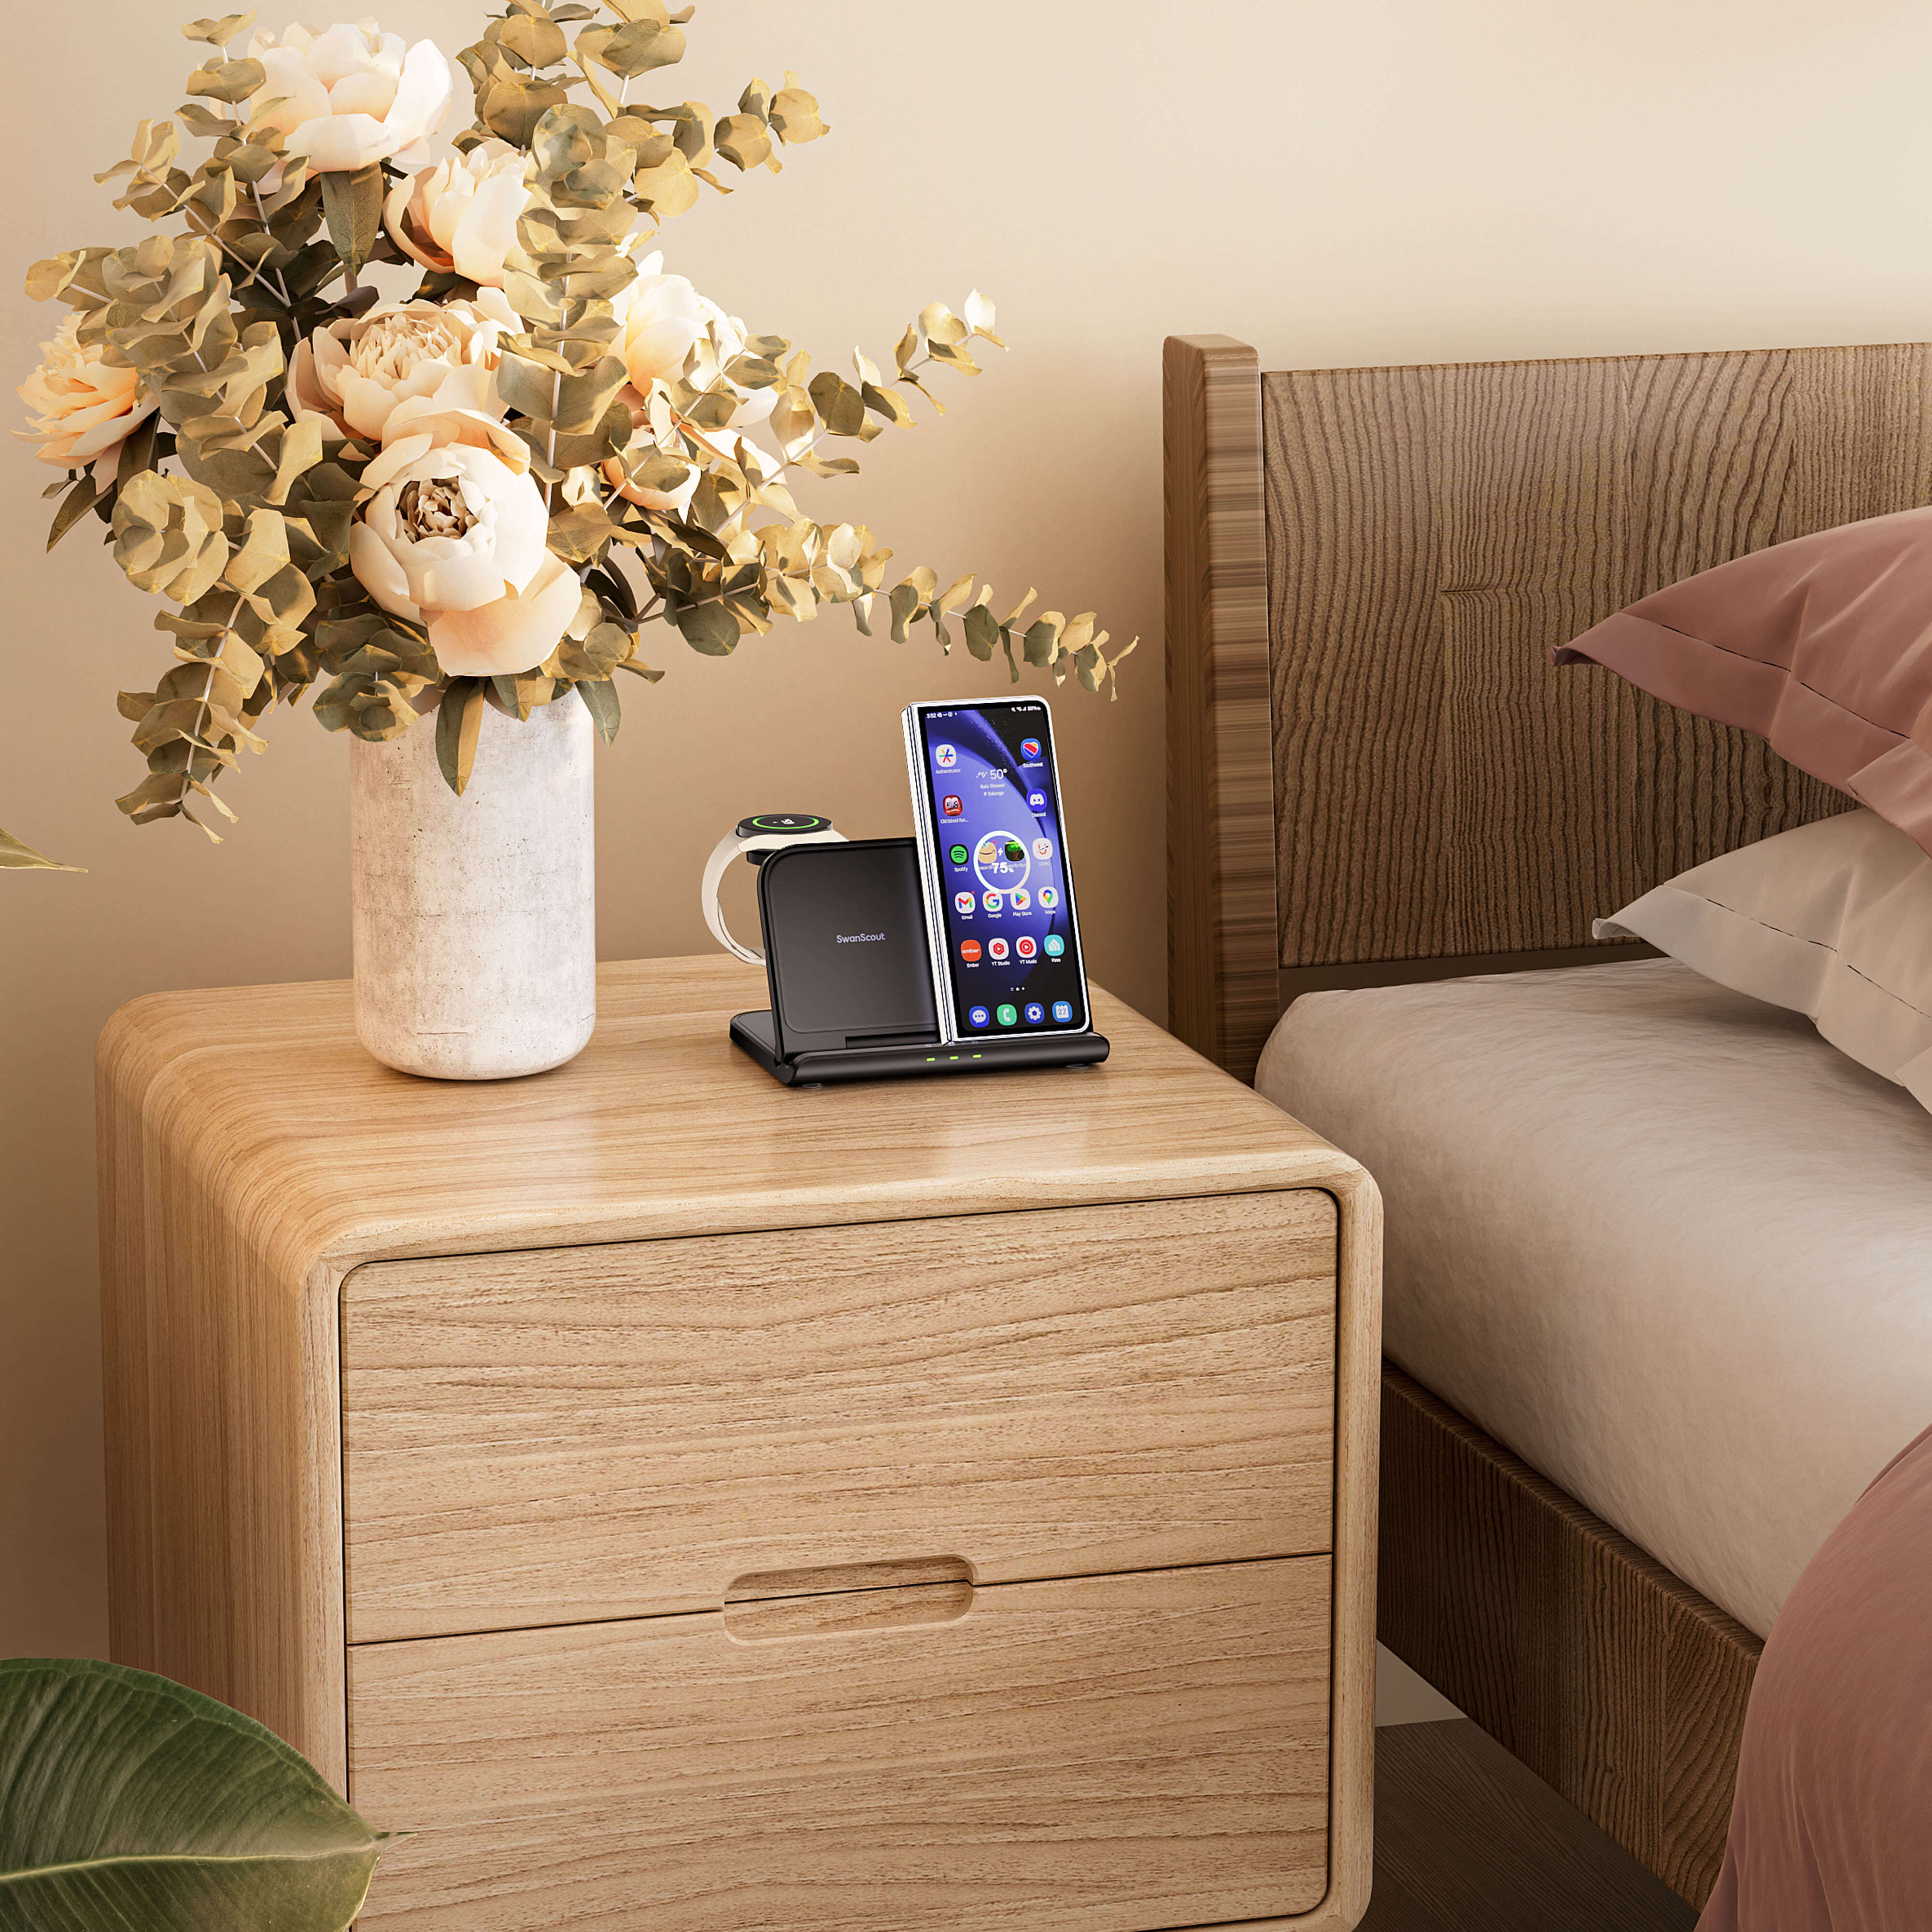 SwanScout 705S is a Three-Coil 3-in-1 Wireless Charger specially engineered to efficiently charge Samsung devices. It boasts the ability to charge multiple devices simultaneously while offering robust functionality. Additionally, its foldable and portable design enhances convenience for on-the-go usage.